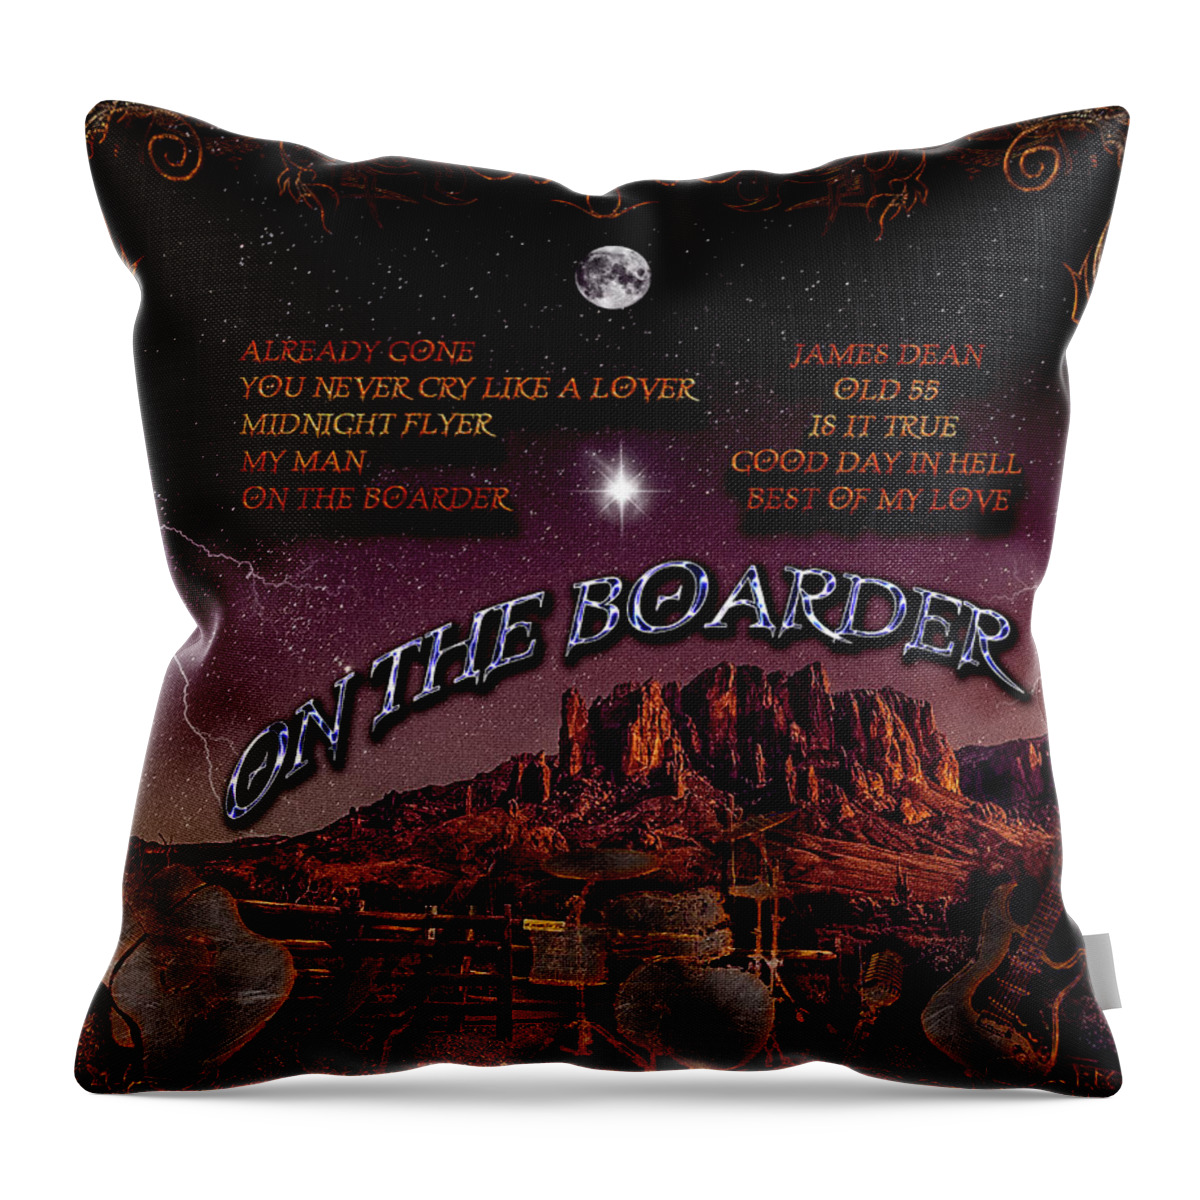 On The Border Throw Pillow featuring the digital art On The Border by Michael Damiani